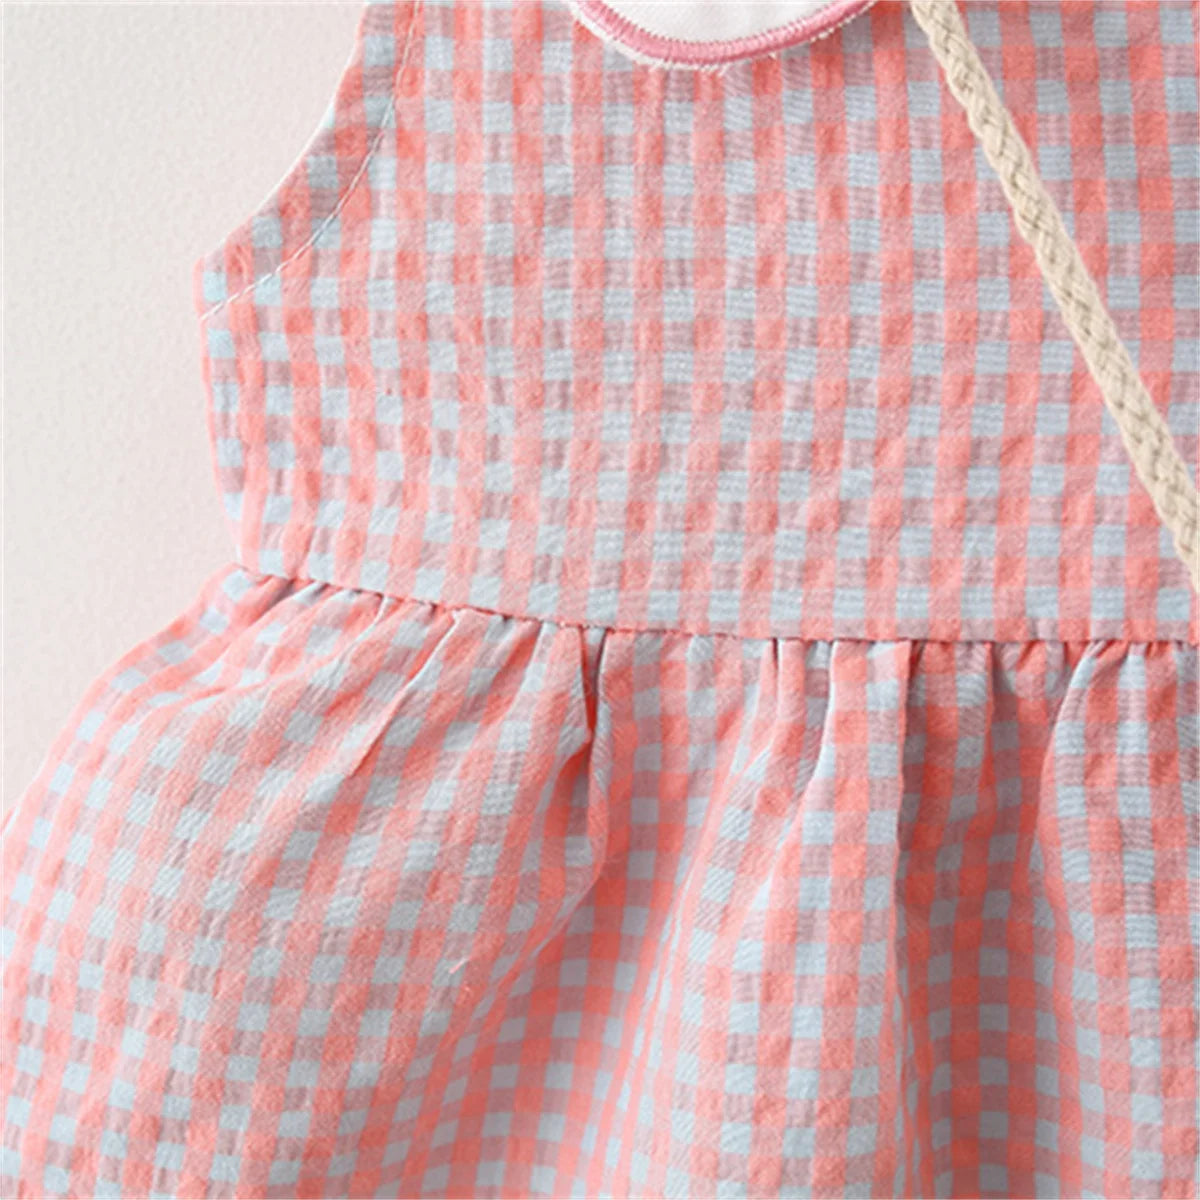 Baby Girl Pink Cotton Dress and Bow Purse Set